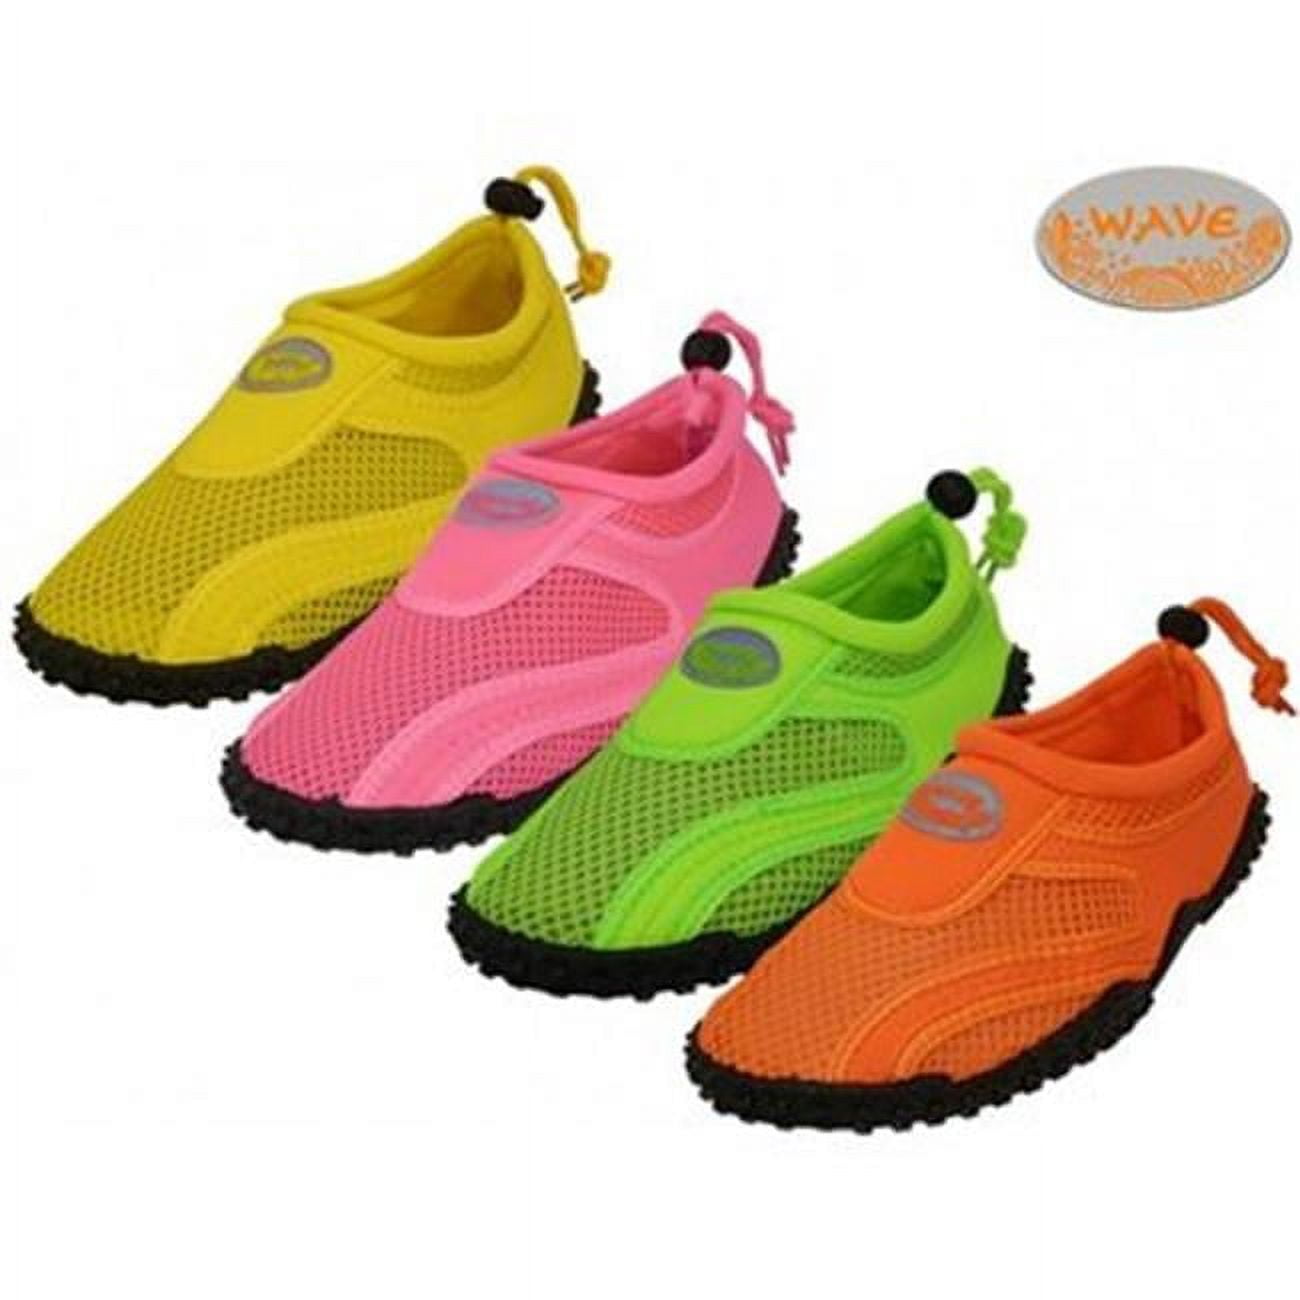 Picture of DDI 2316024 Women&apos;s Neon color Wave Water shoes (36 pairs)  Size #5-10 Case of 36